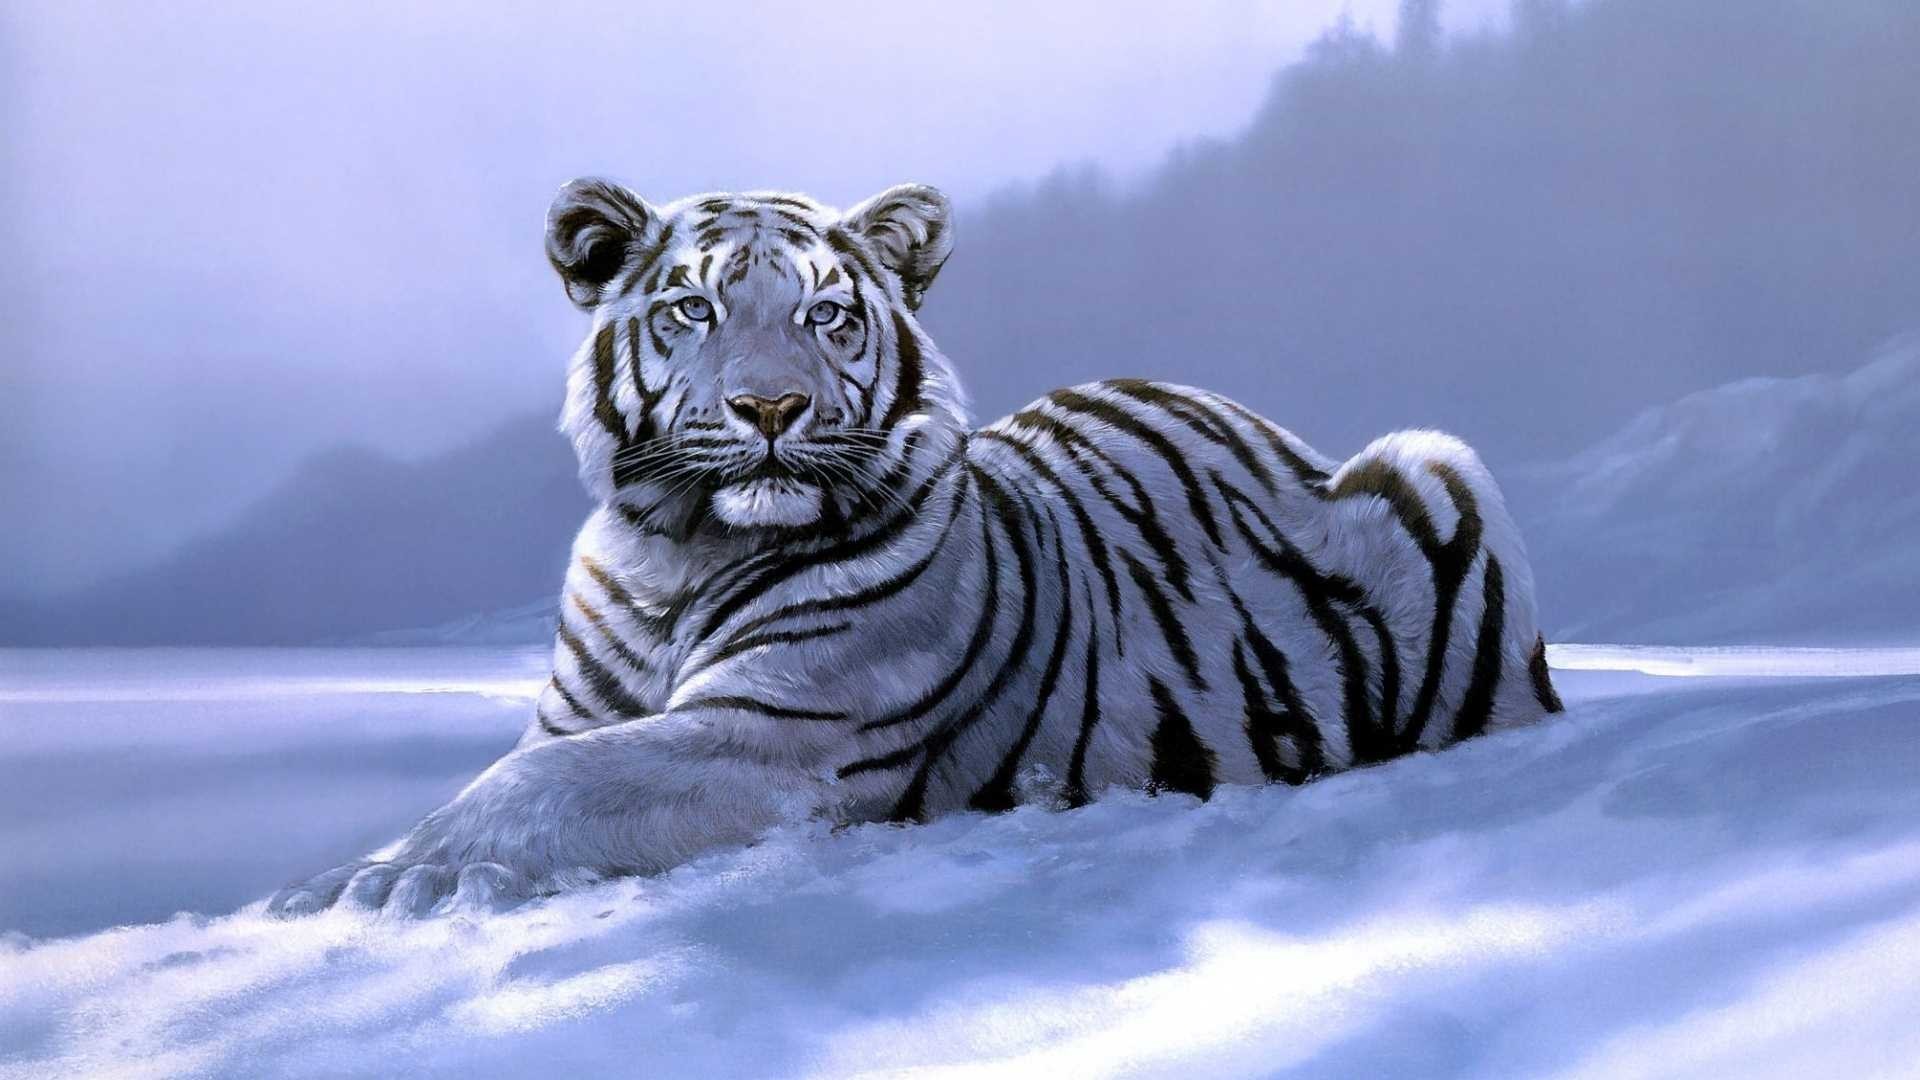 1920x1080  White Tiger Wallpaper Best Collection Of Tiger HD Wallpapers.  Download Â· 2560x1600 ...